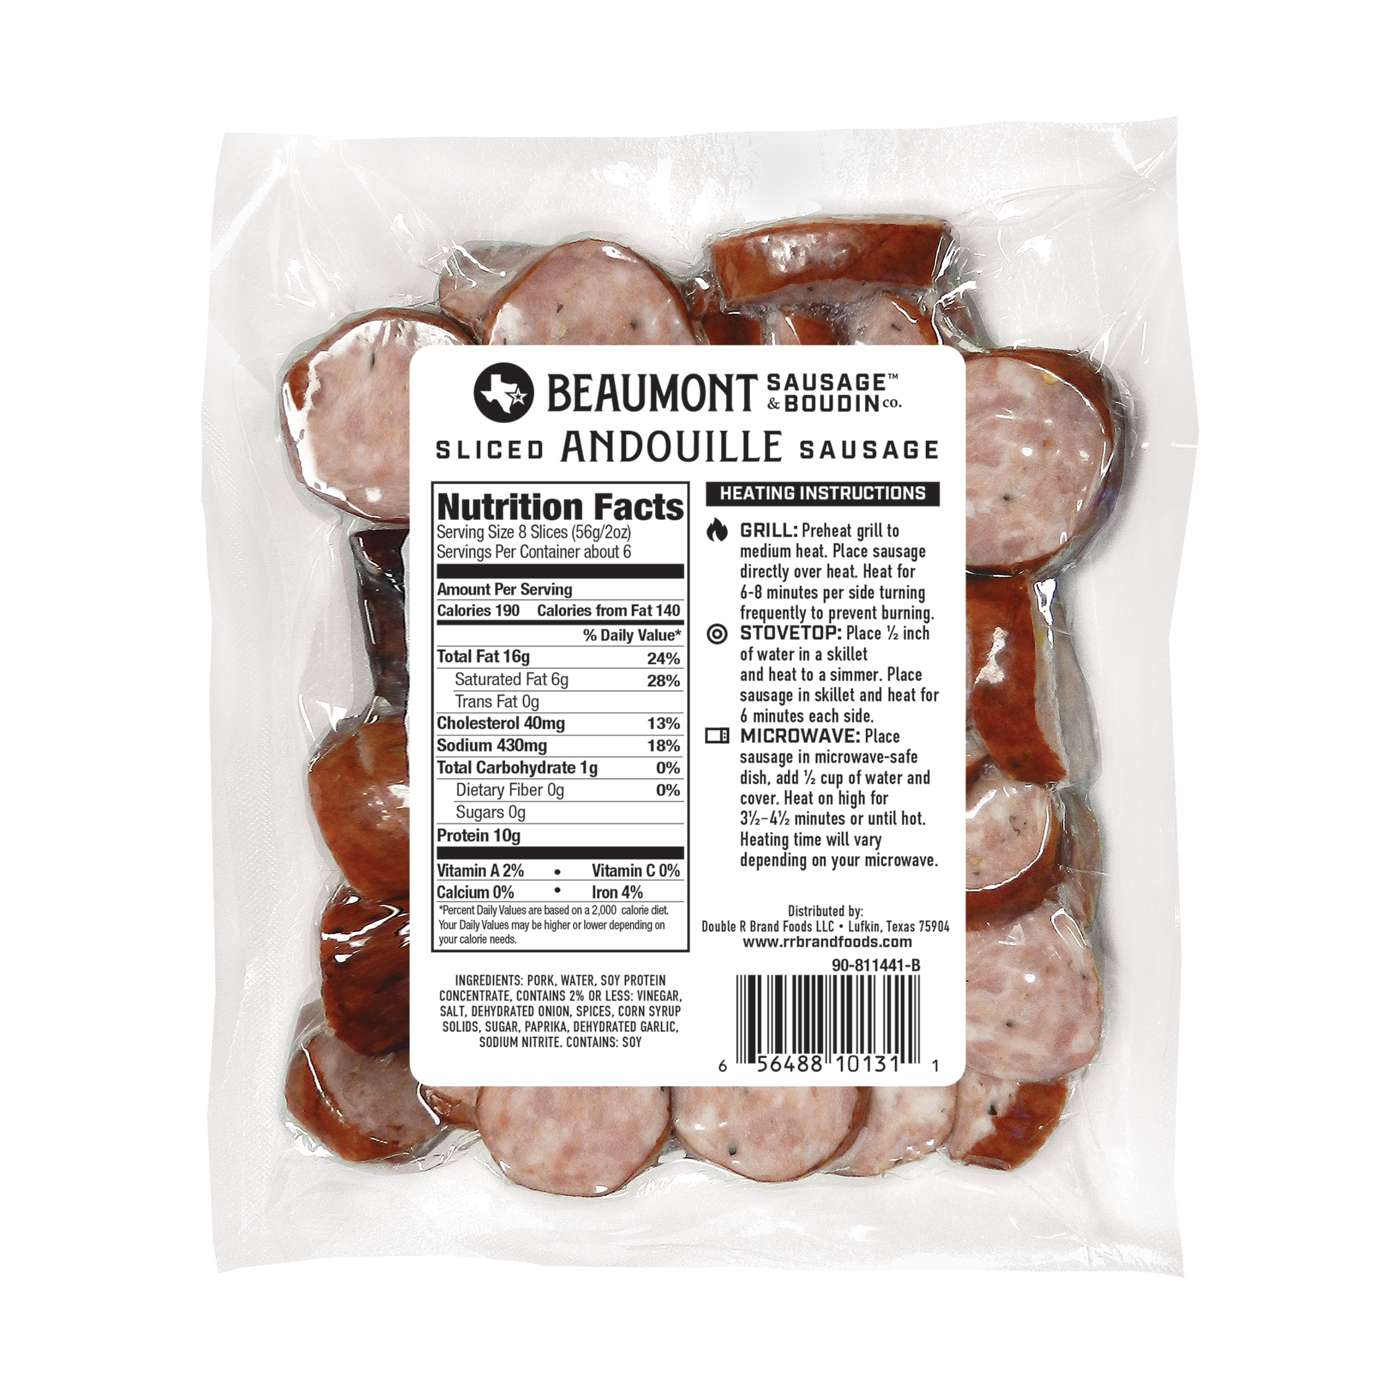 Beaumont Sausage & Boudin Co. Sliced Andouille Sausage; image 2 of 2